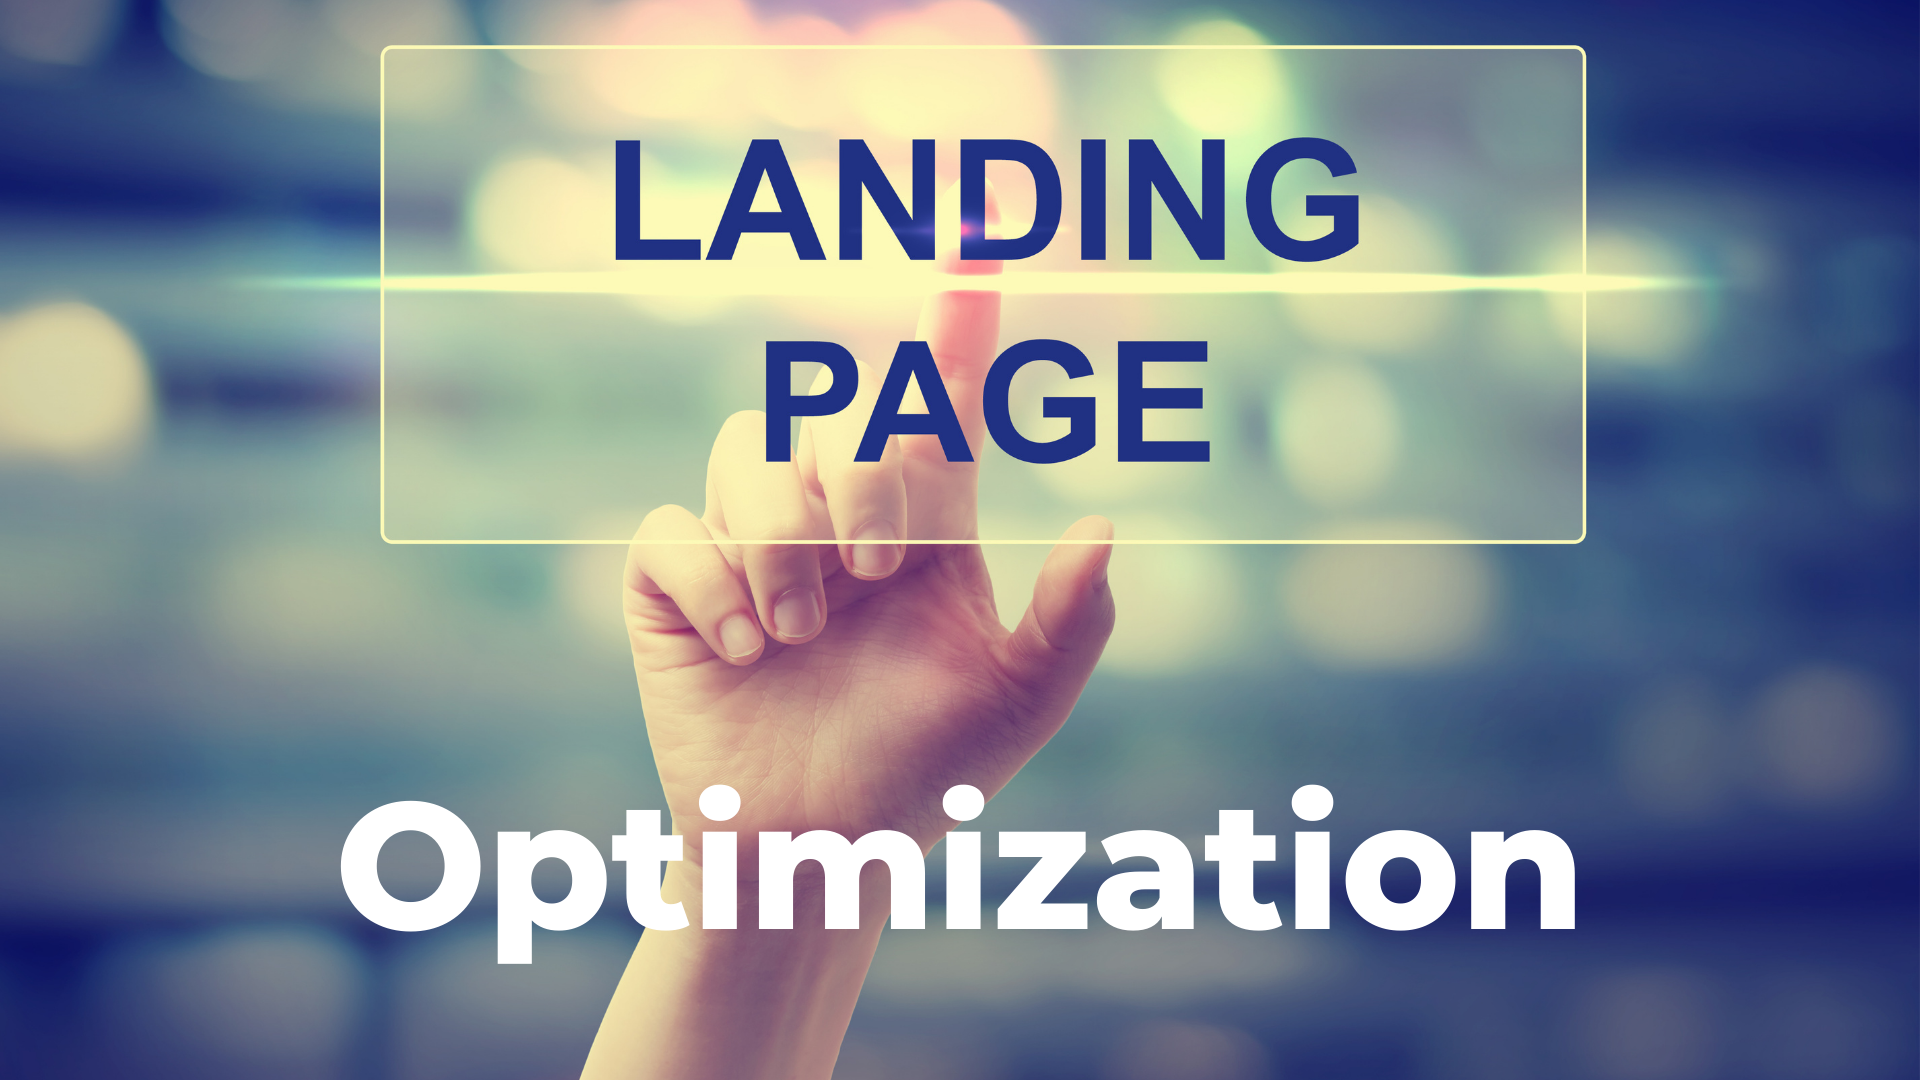 6 Ways to Optimize Your Landing Pages